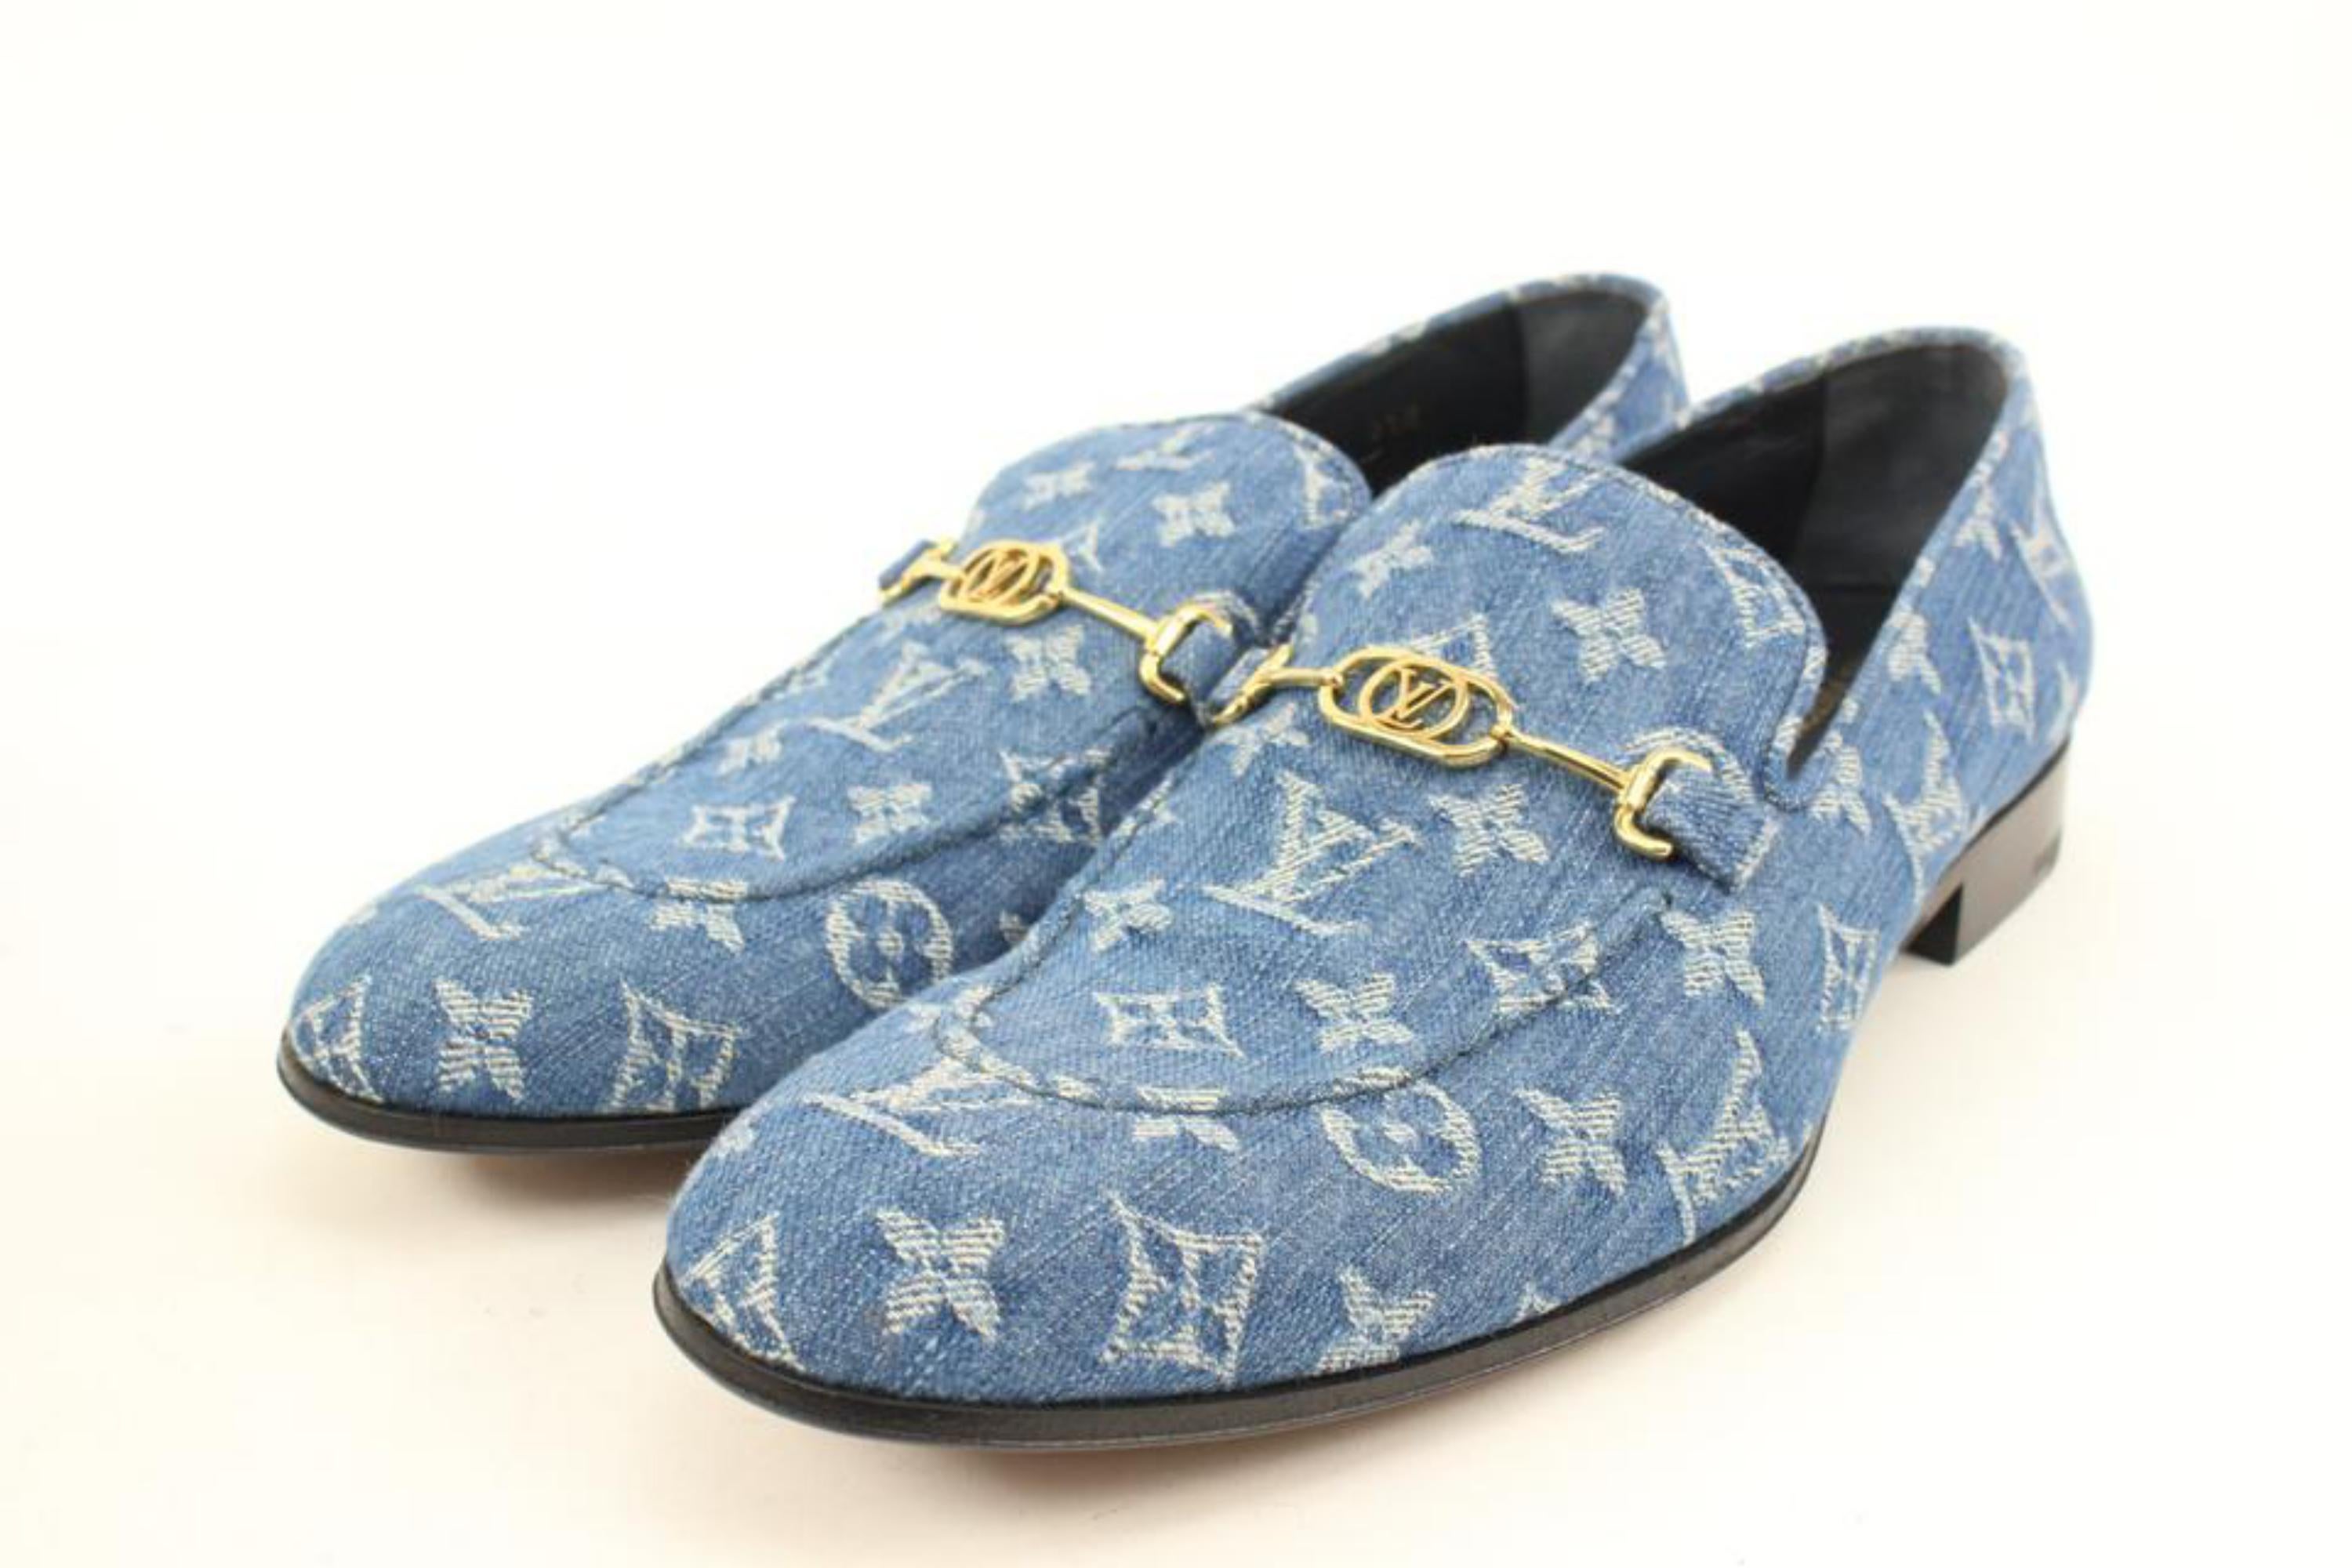 Louis Vuitton Shoes Size 8 - 28 For Sale on 1stDibs  louis vuitton loafers  sale, size 8 in louis vuitton shoes, louis vuitton shoe sizes